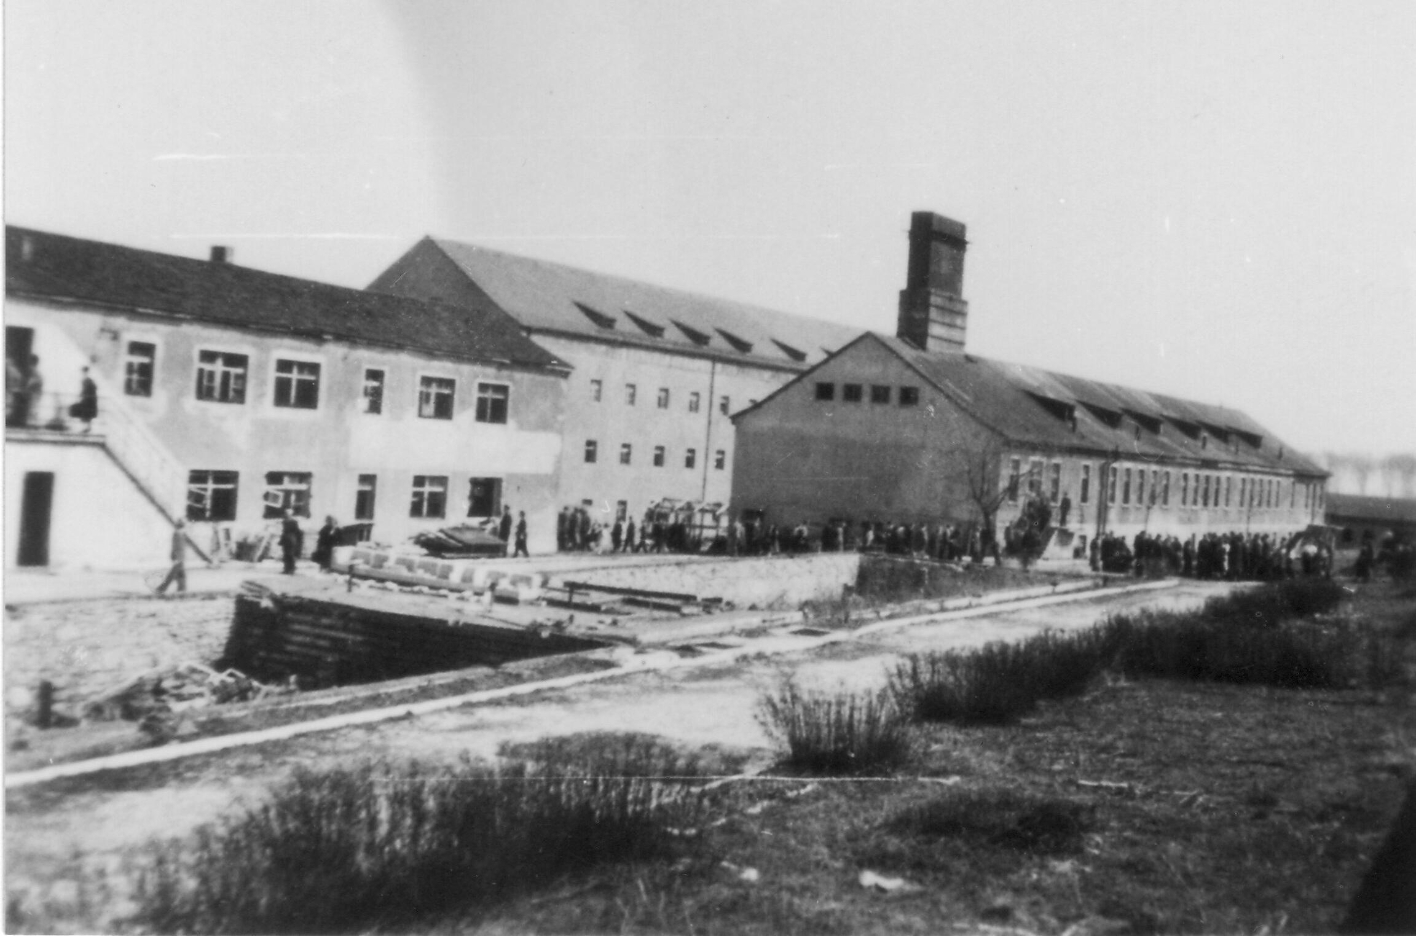  View from the northwest of stone barracks No. 13 and the chamber building behind it. On the far right is the former prisoner laundry.